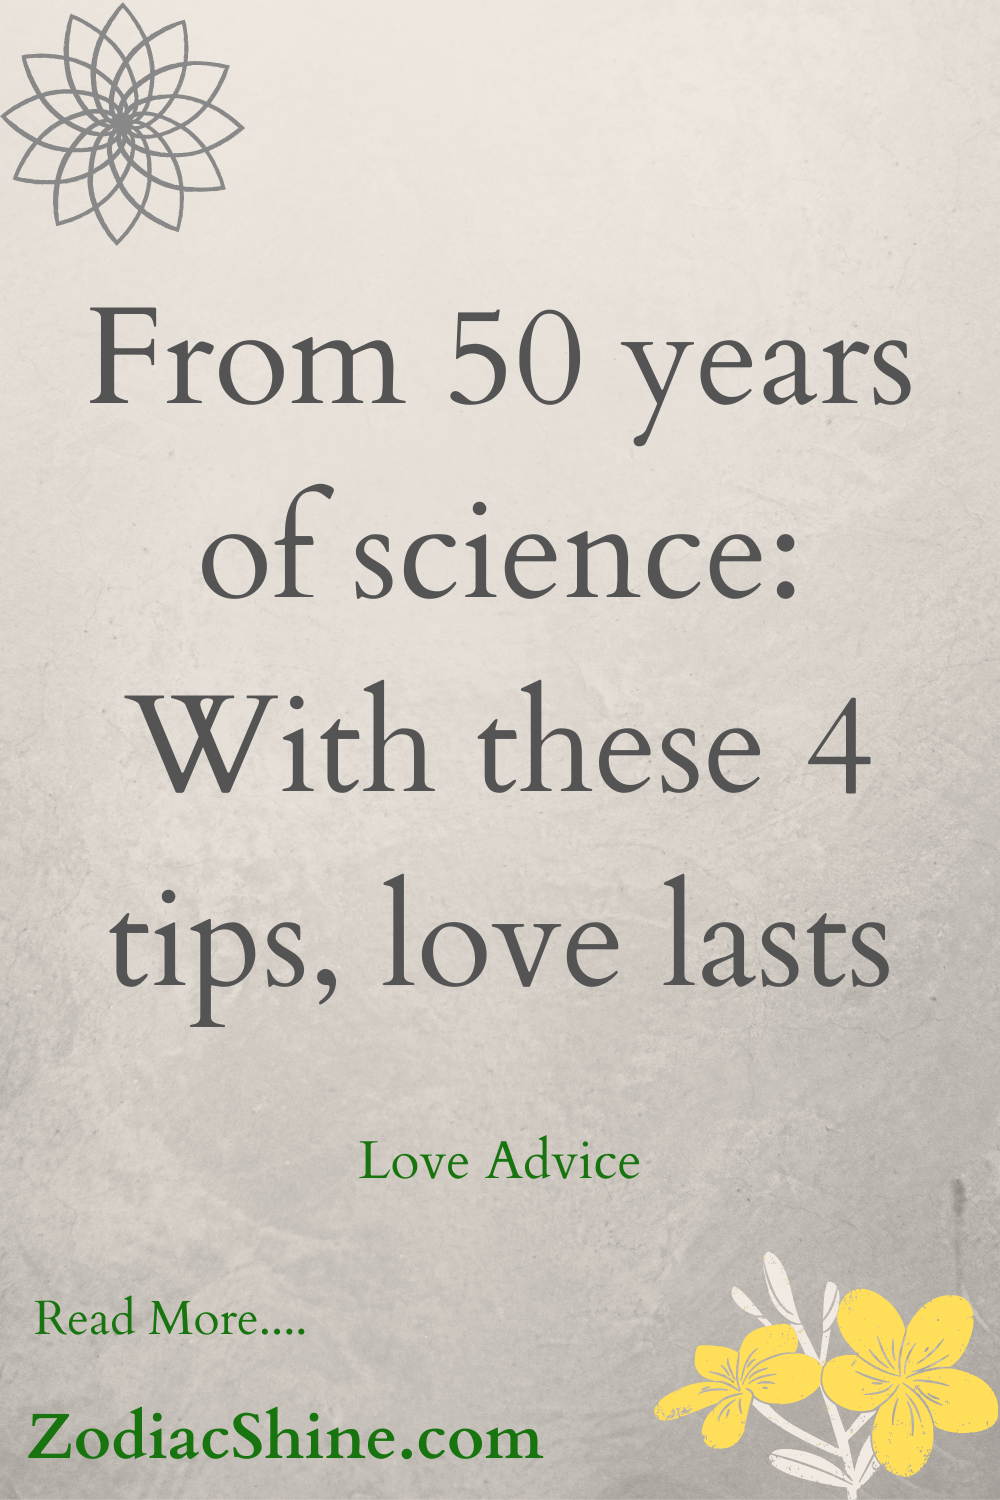 From 50 years of science: With these 4 tips, love lasts